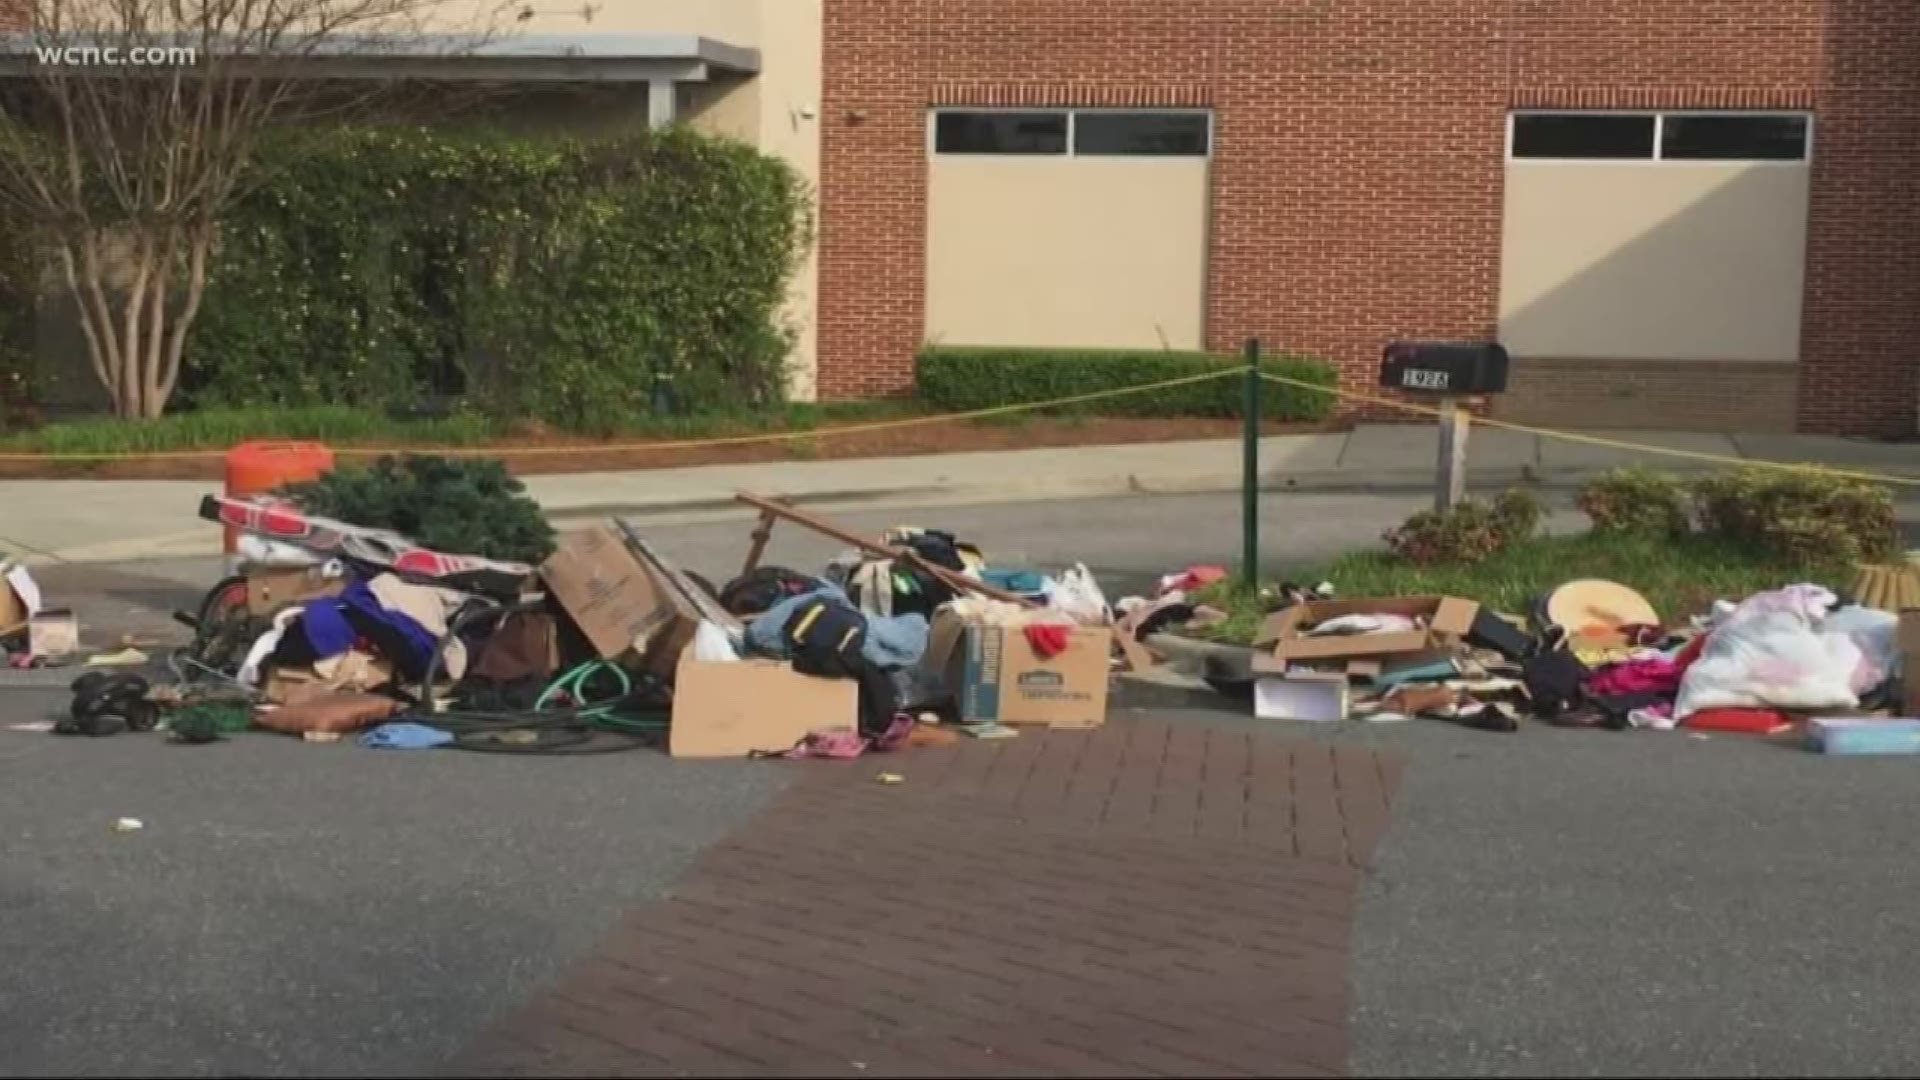 Goodwill Industries of the Southern Piedmont is asking the public to stop donations amid the COVID-19 crisis as piles of items accumulate outside closed locations.